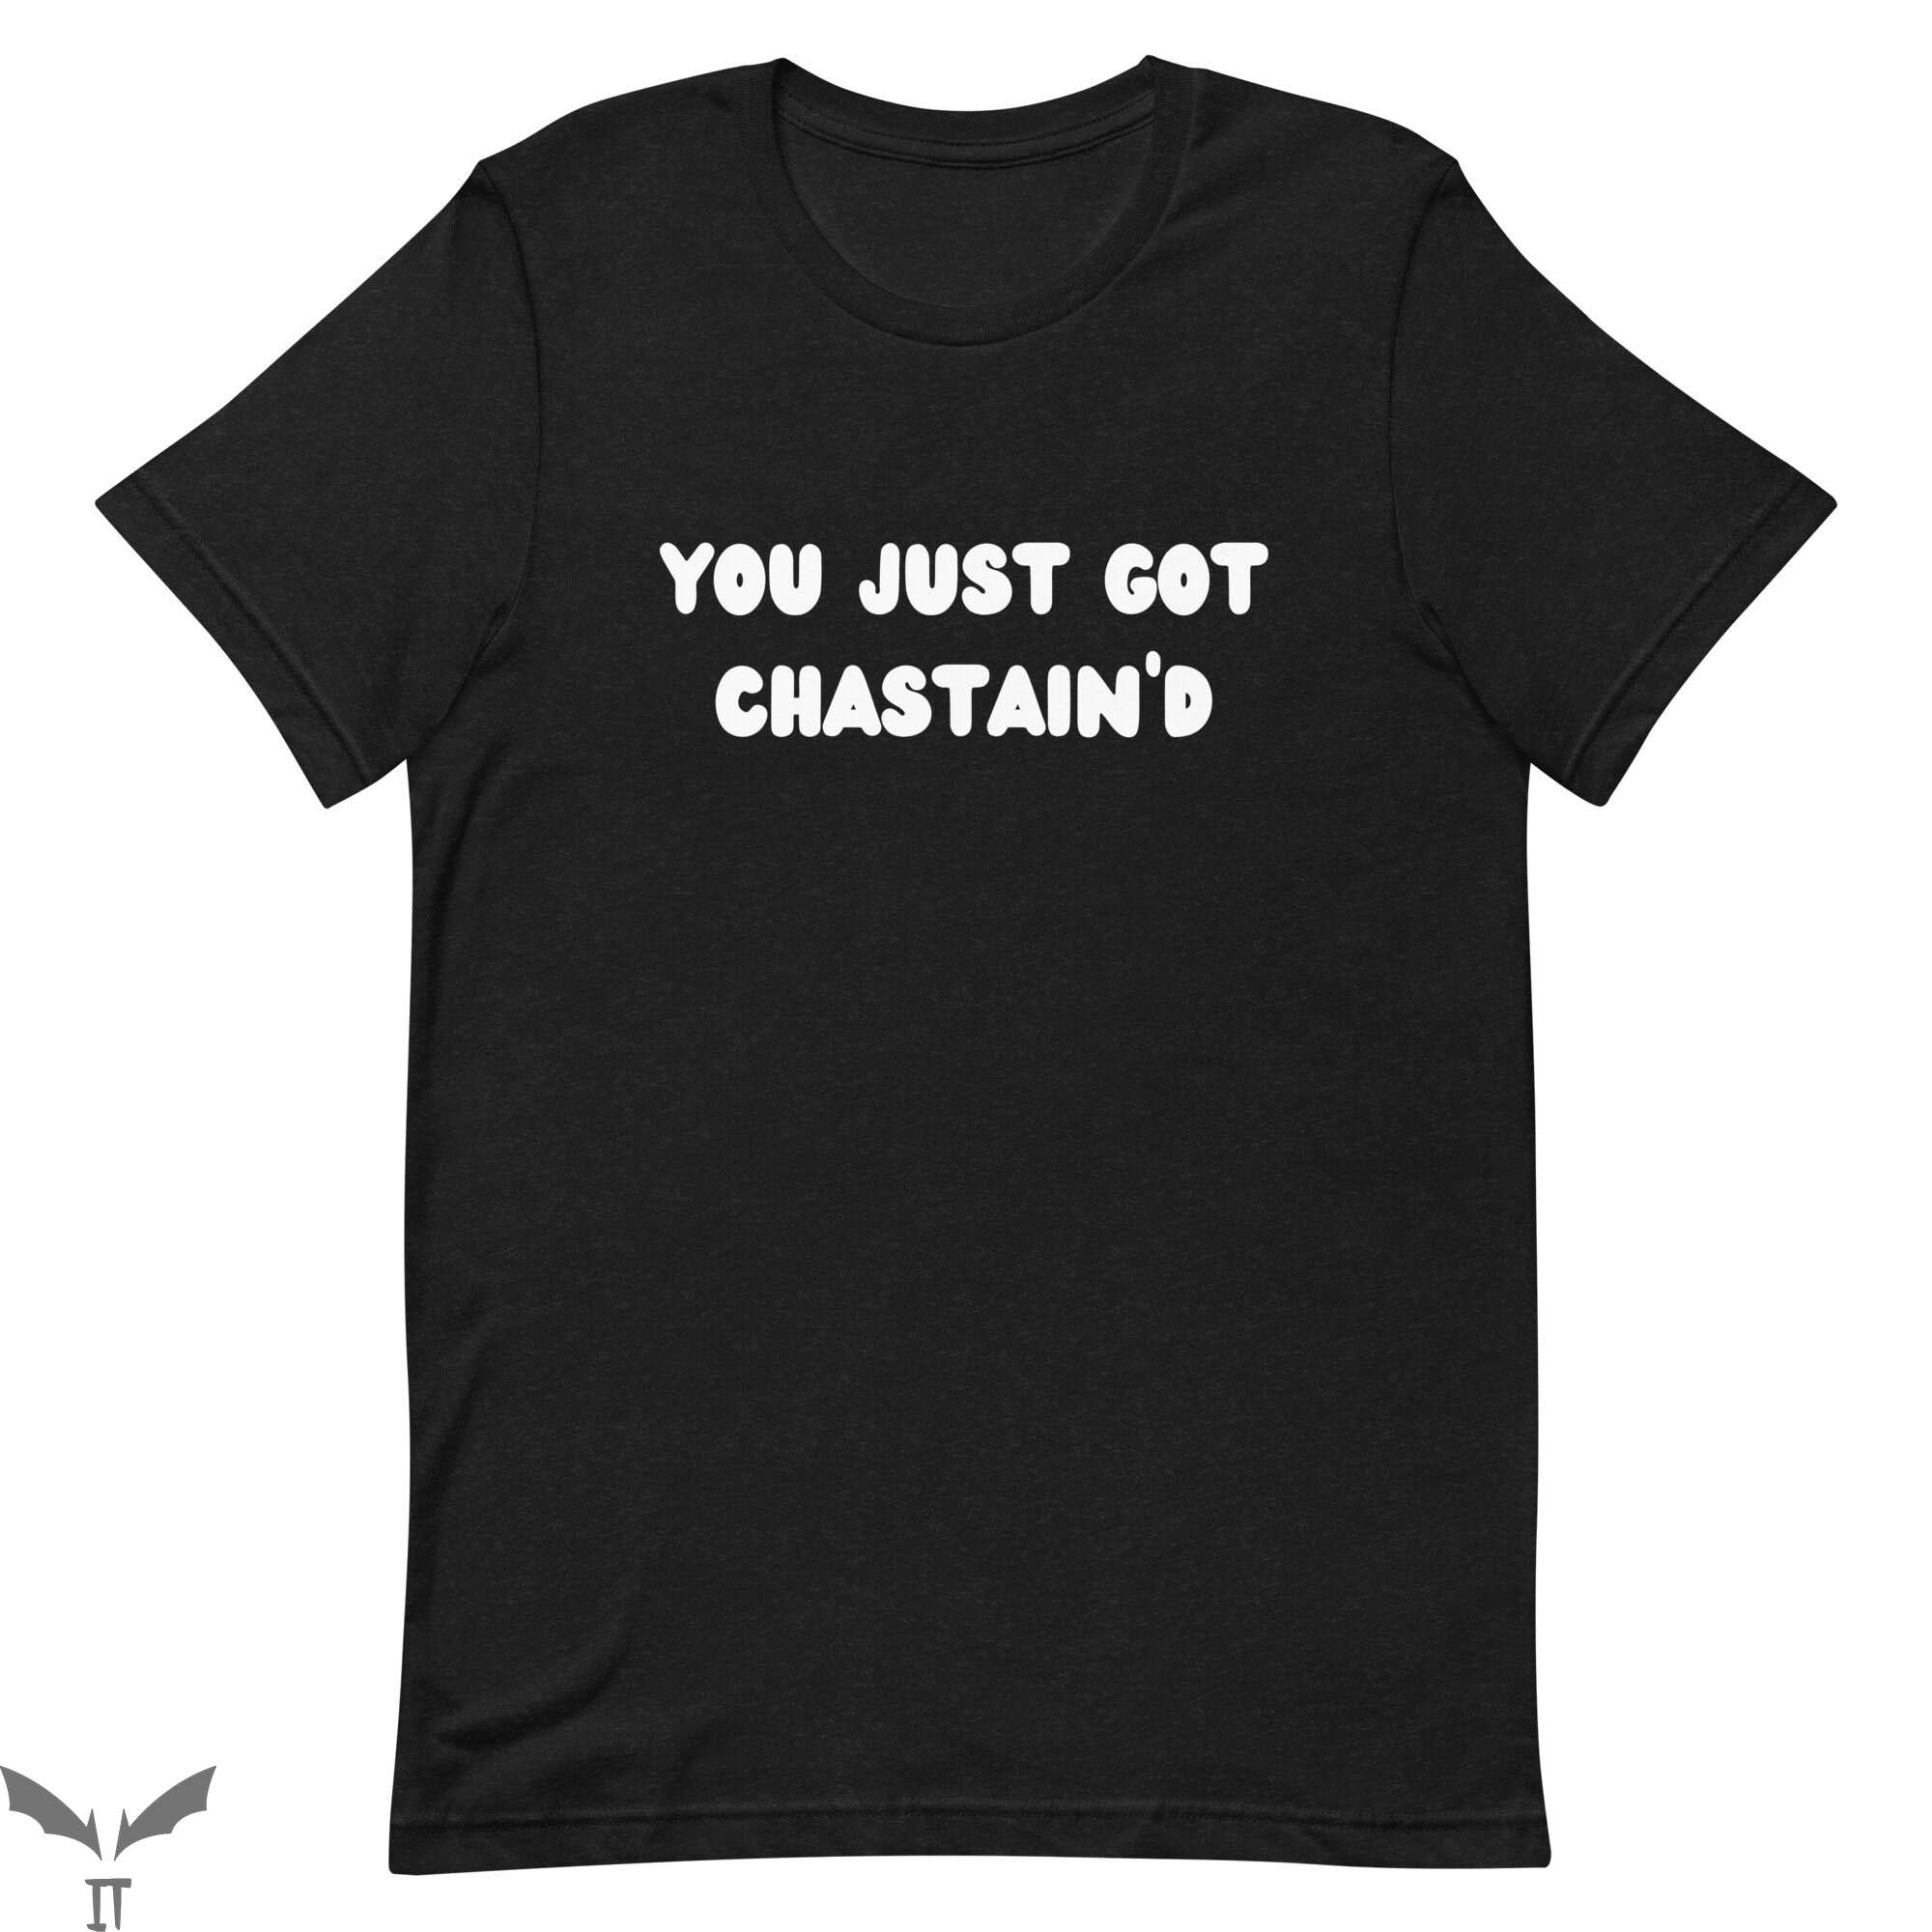 Ross Chastain T-Shirt You Just Got Chastain'd Racing Tee